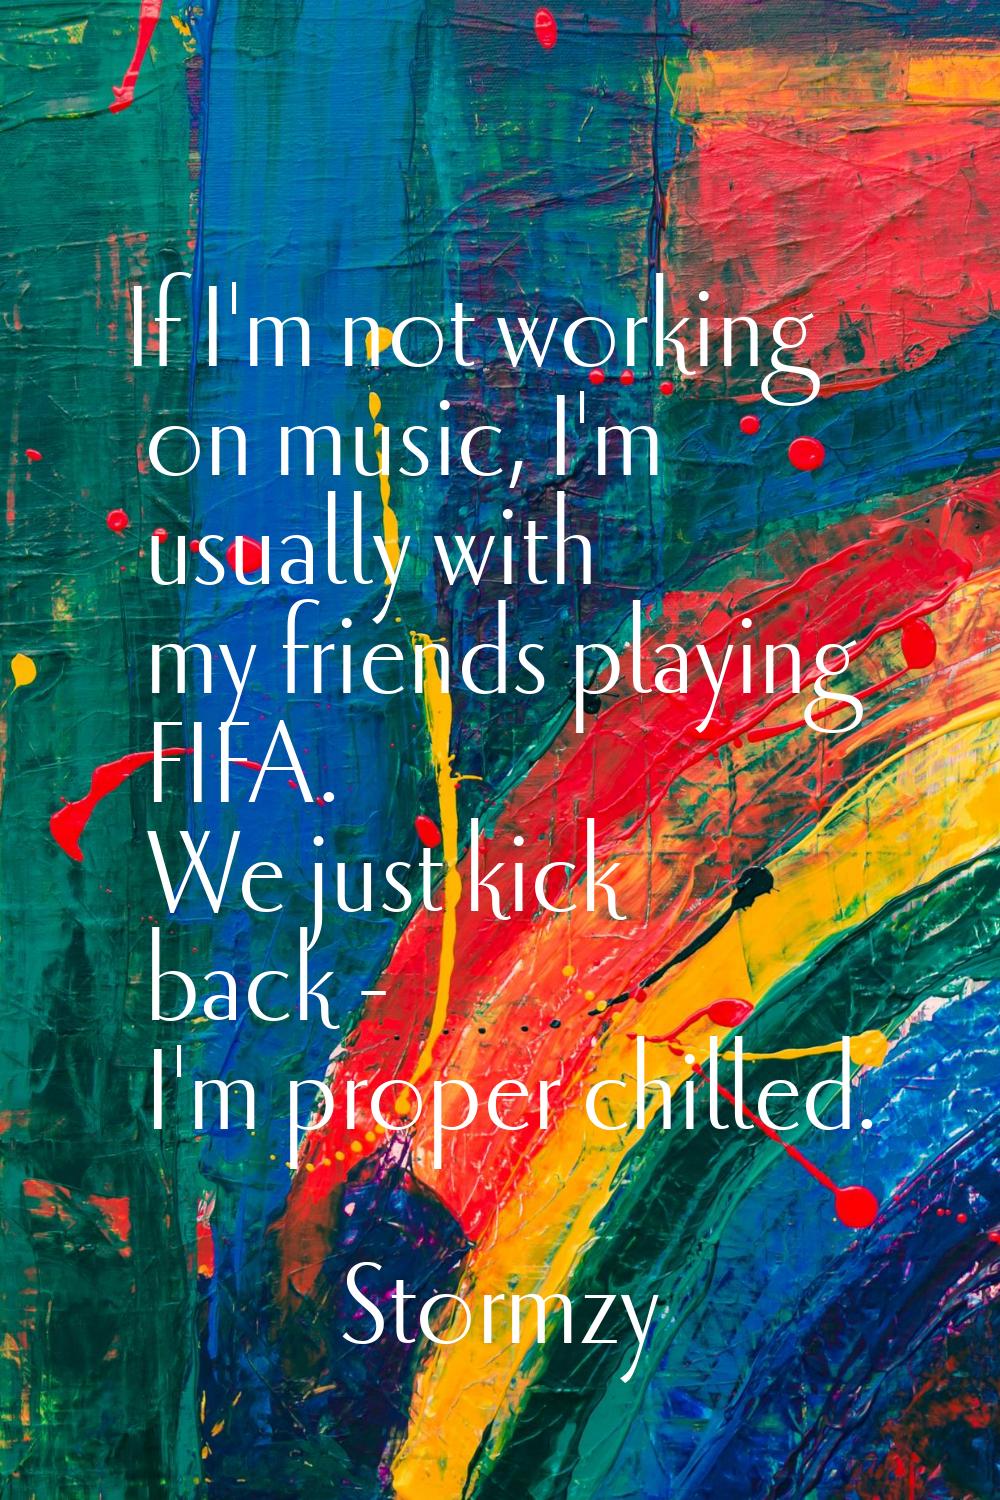 If I'm not working on music, I'm usually with my friends playing FIFA. We just kick back - I'm prop